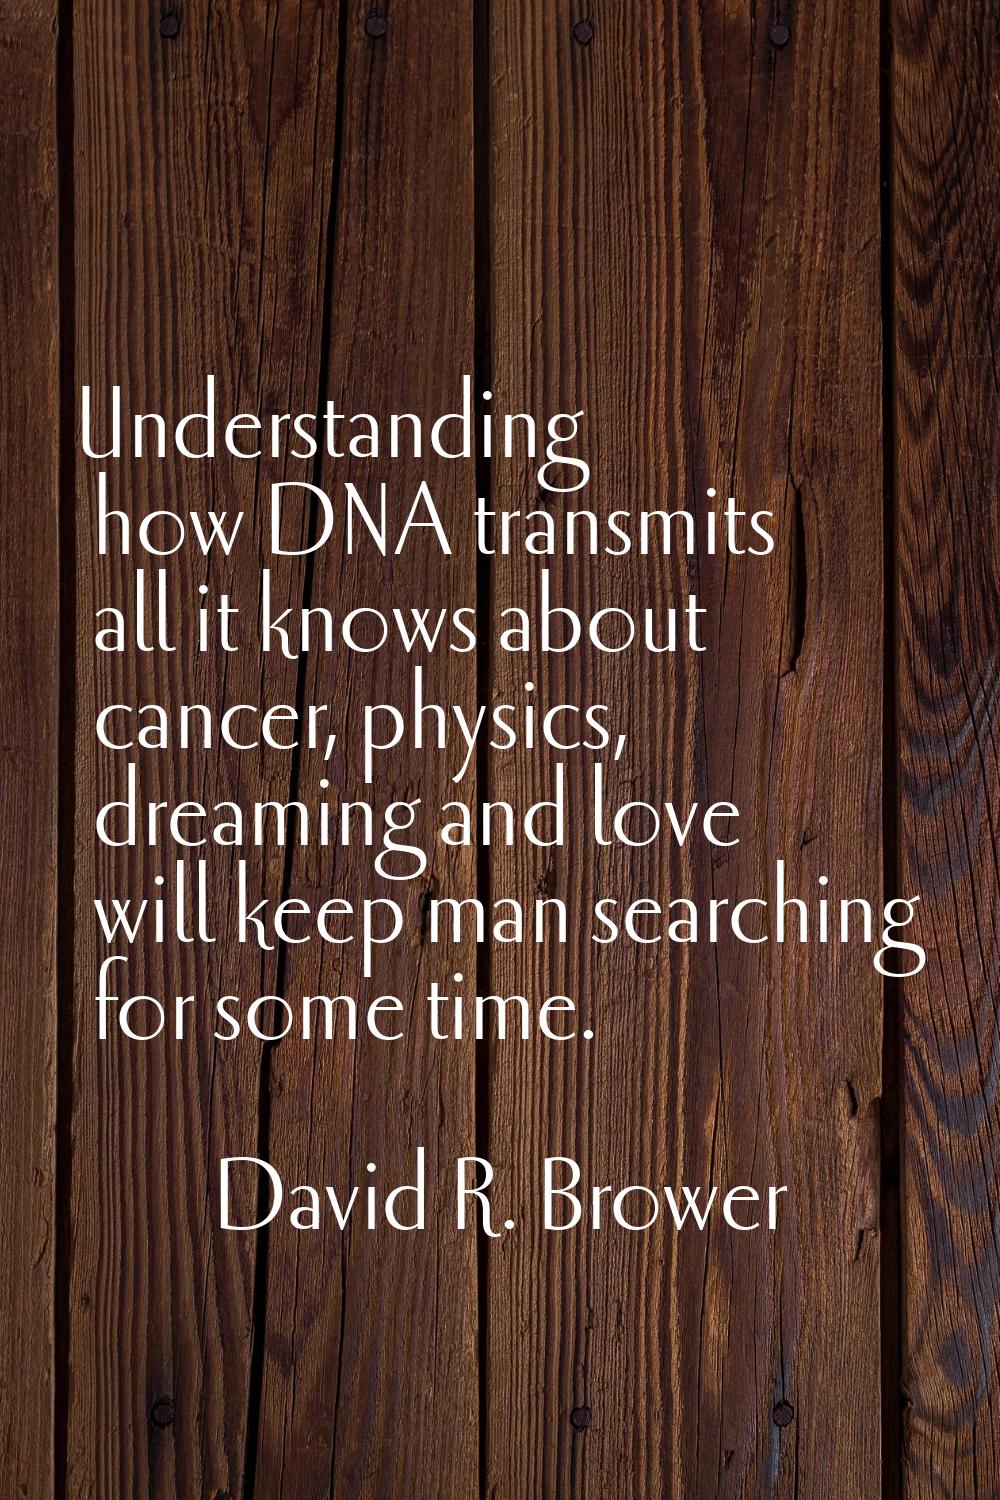 Understanding how DNA transmits all it knows about cancer, physics, dreaming and love will keep man